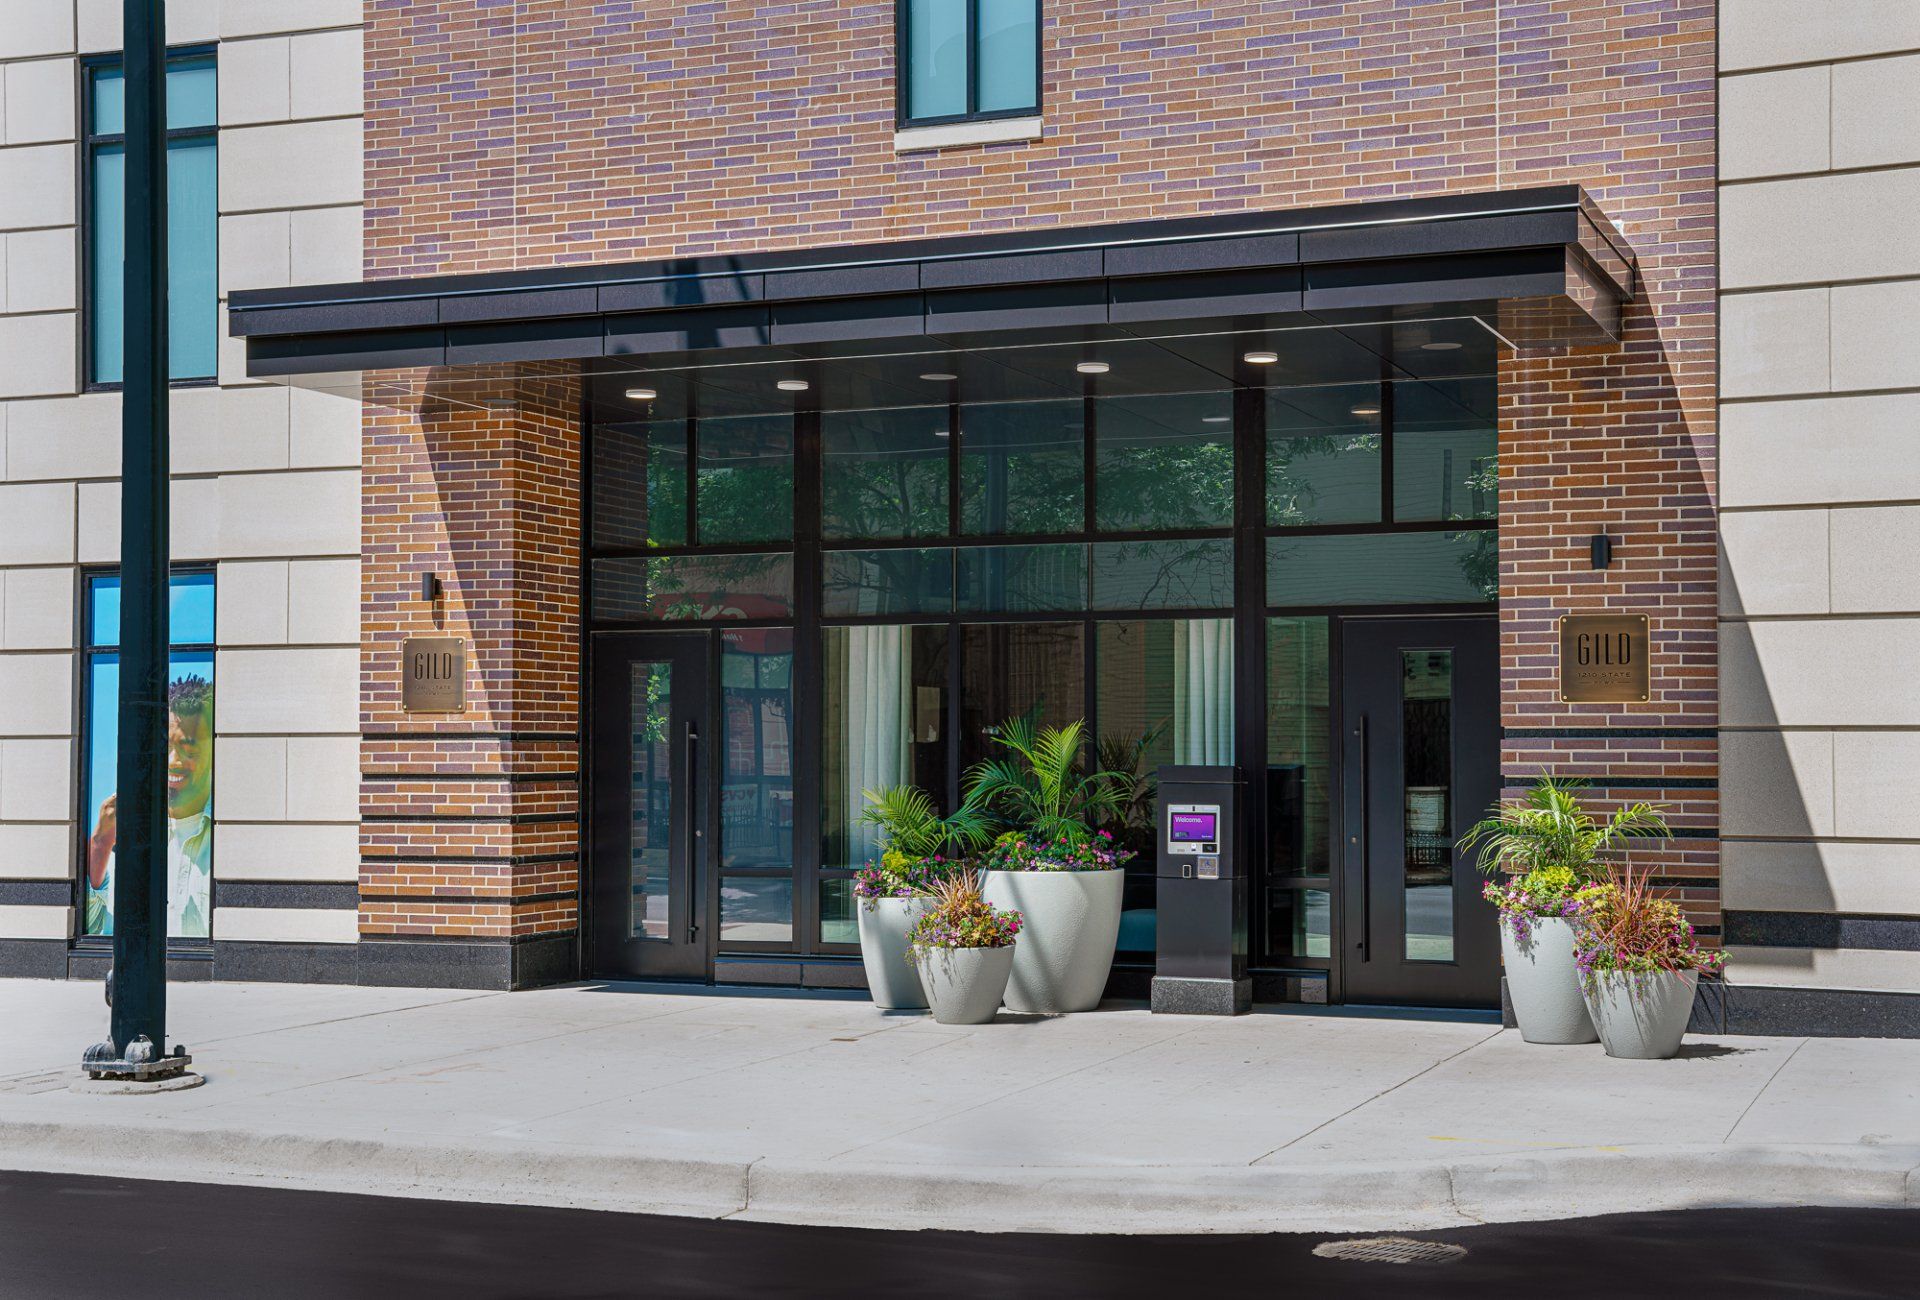 Gild apartment building front entrance with glass doors.